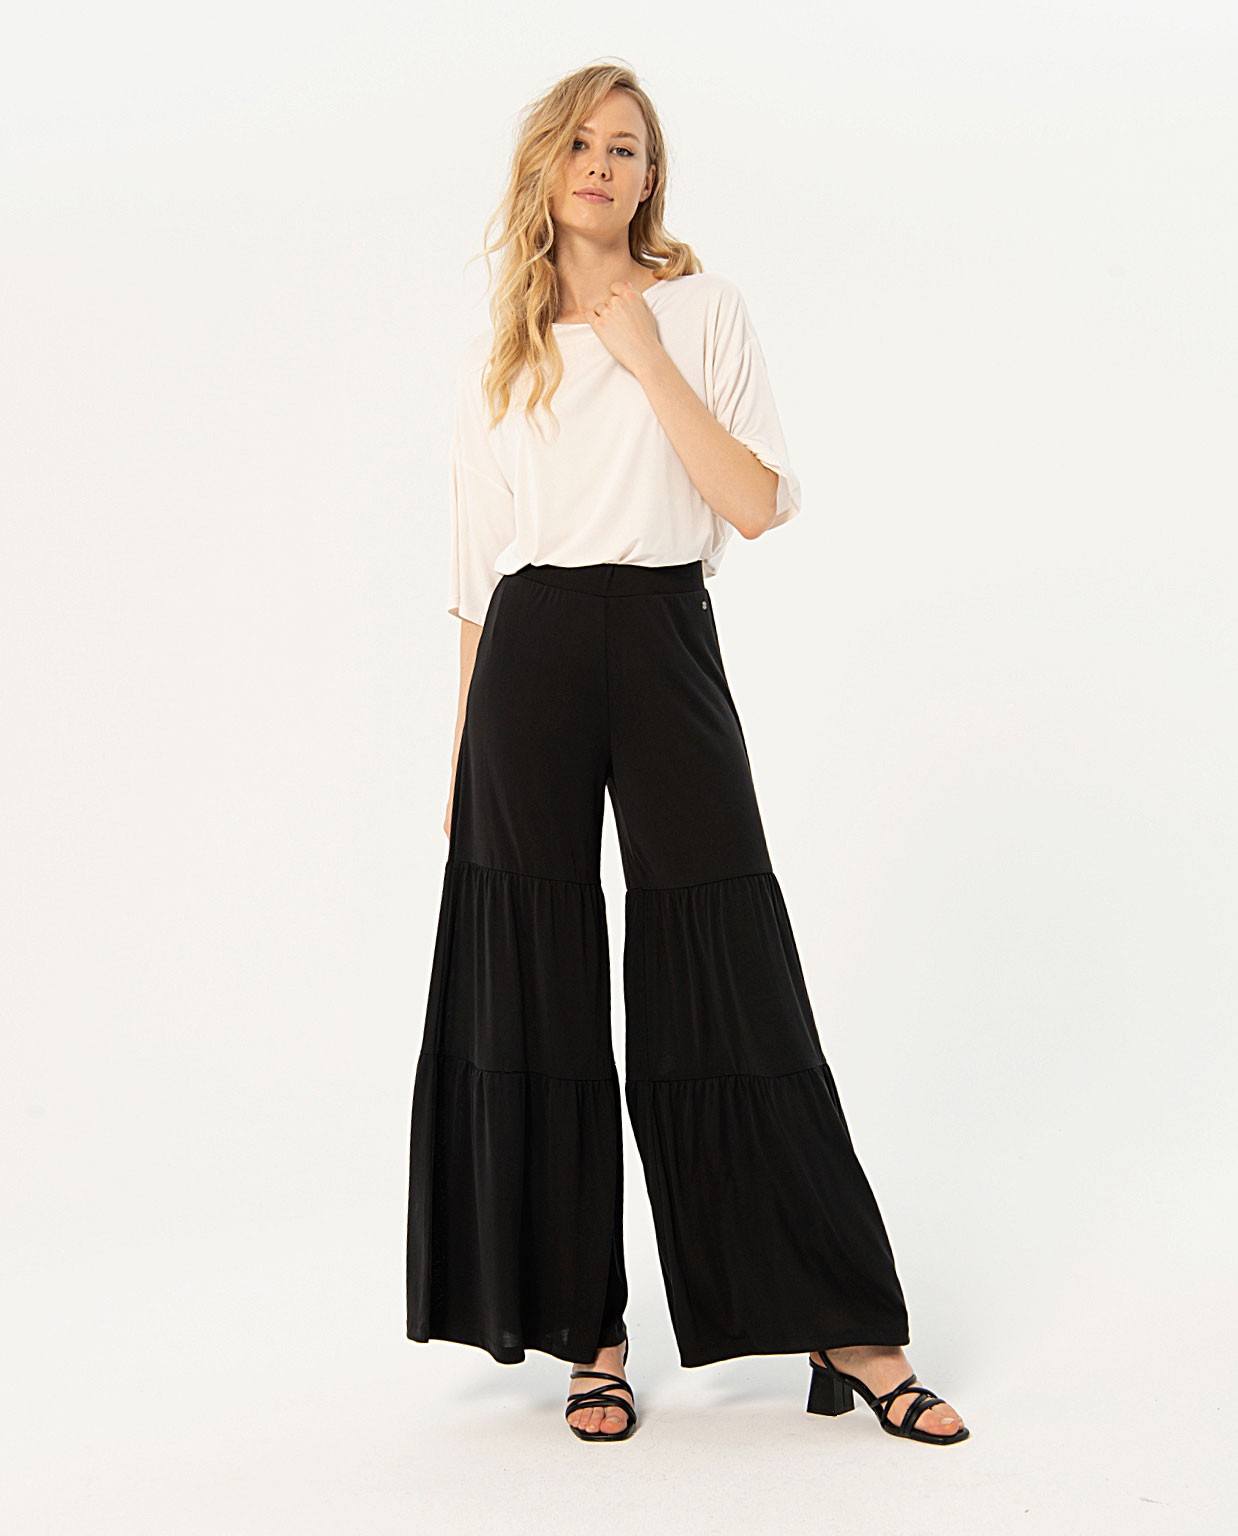 Long pants with ruffles, smooth Black